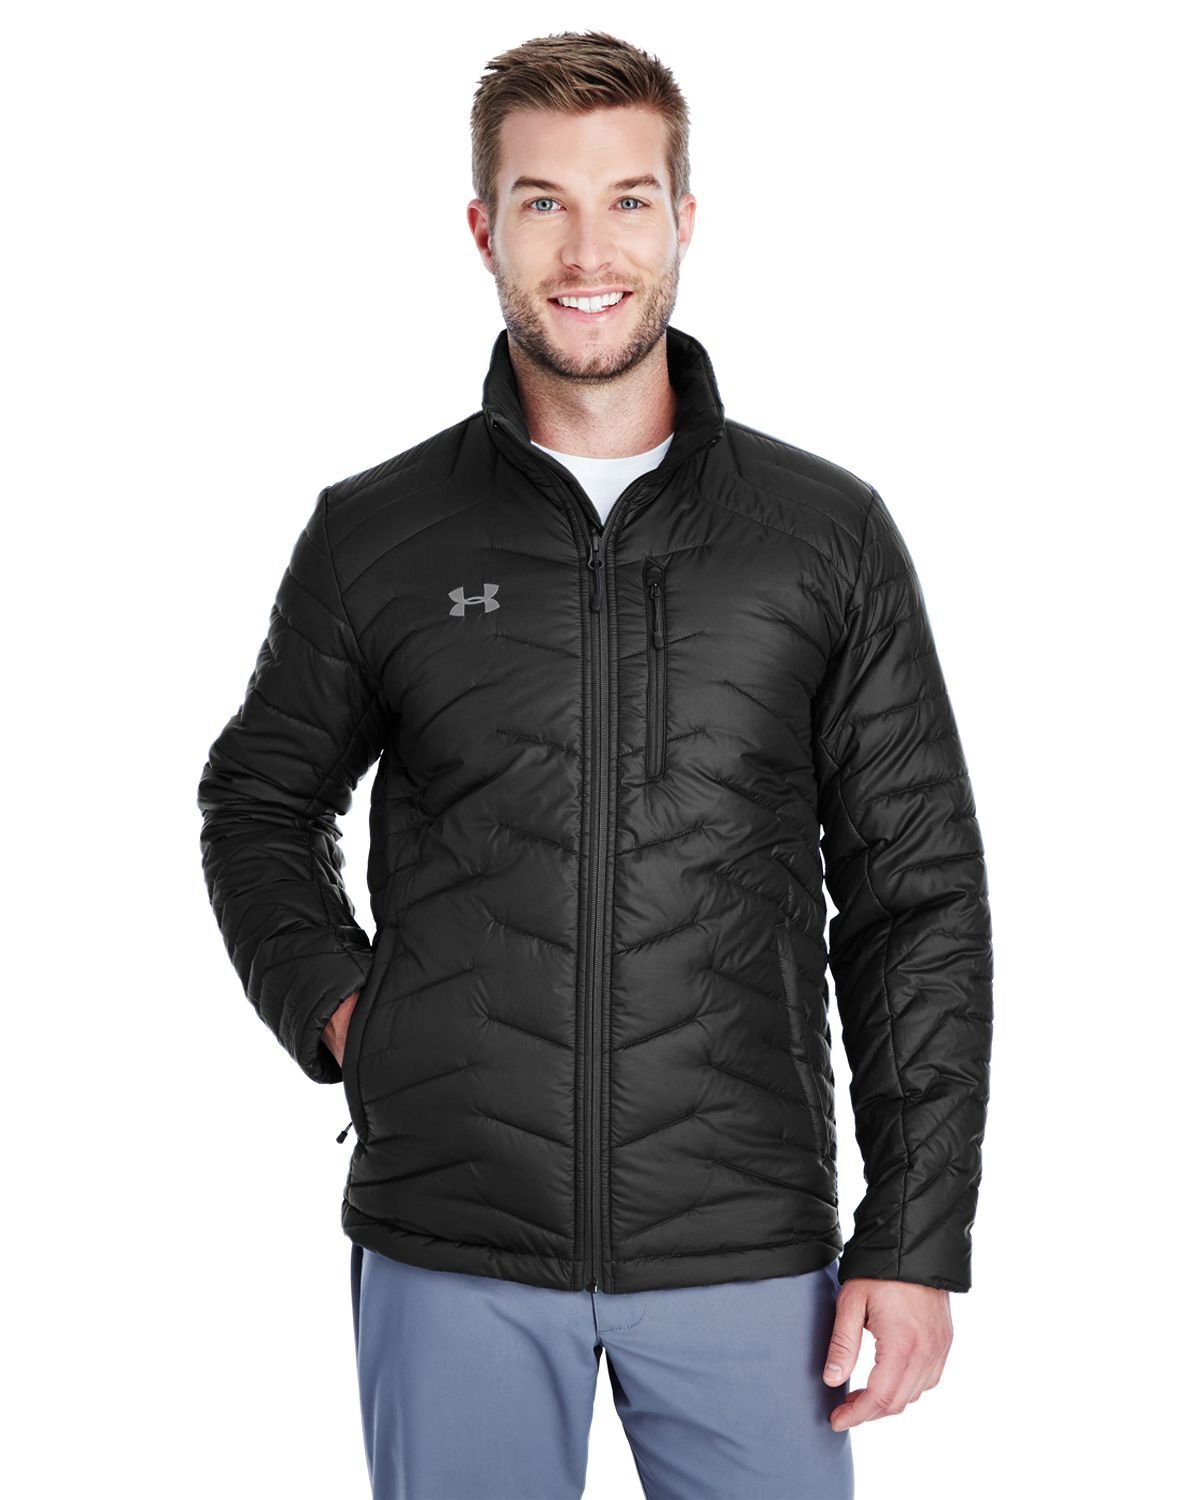 Under Armour 1317223 Mens Corporate Reactor Jacket - A2ZClothing.com